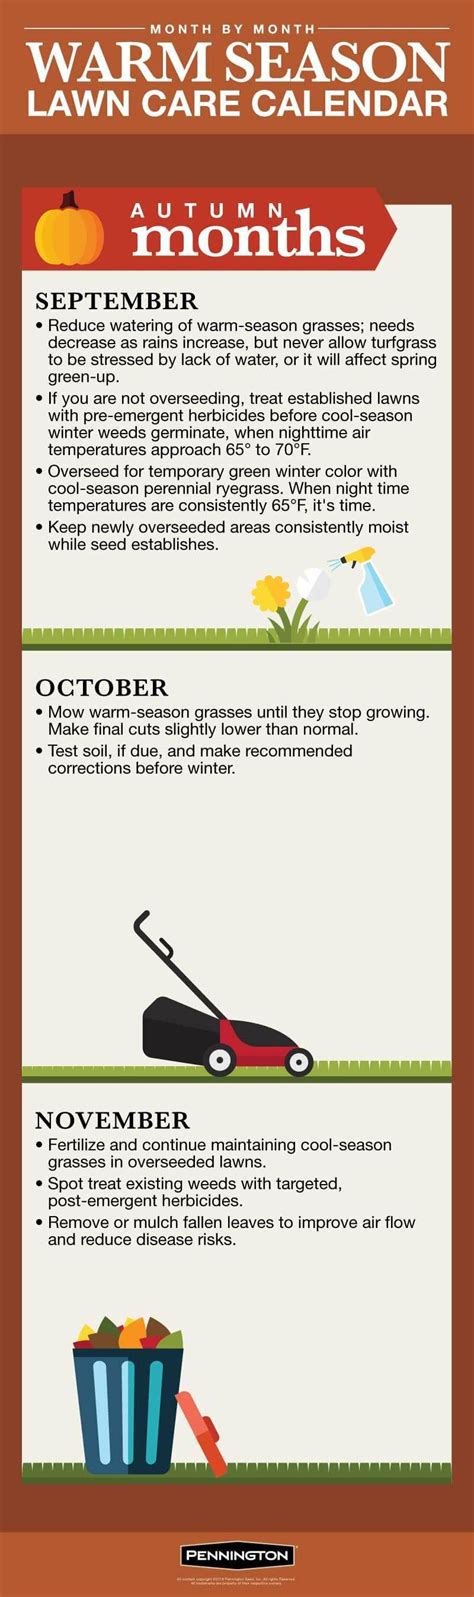 Month By Month Care Calendar For Warm Season Lawns Autumn Lawn Care